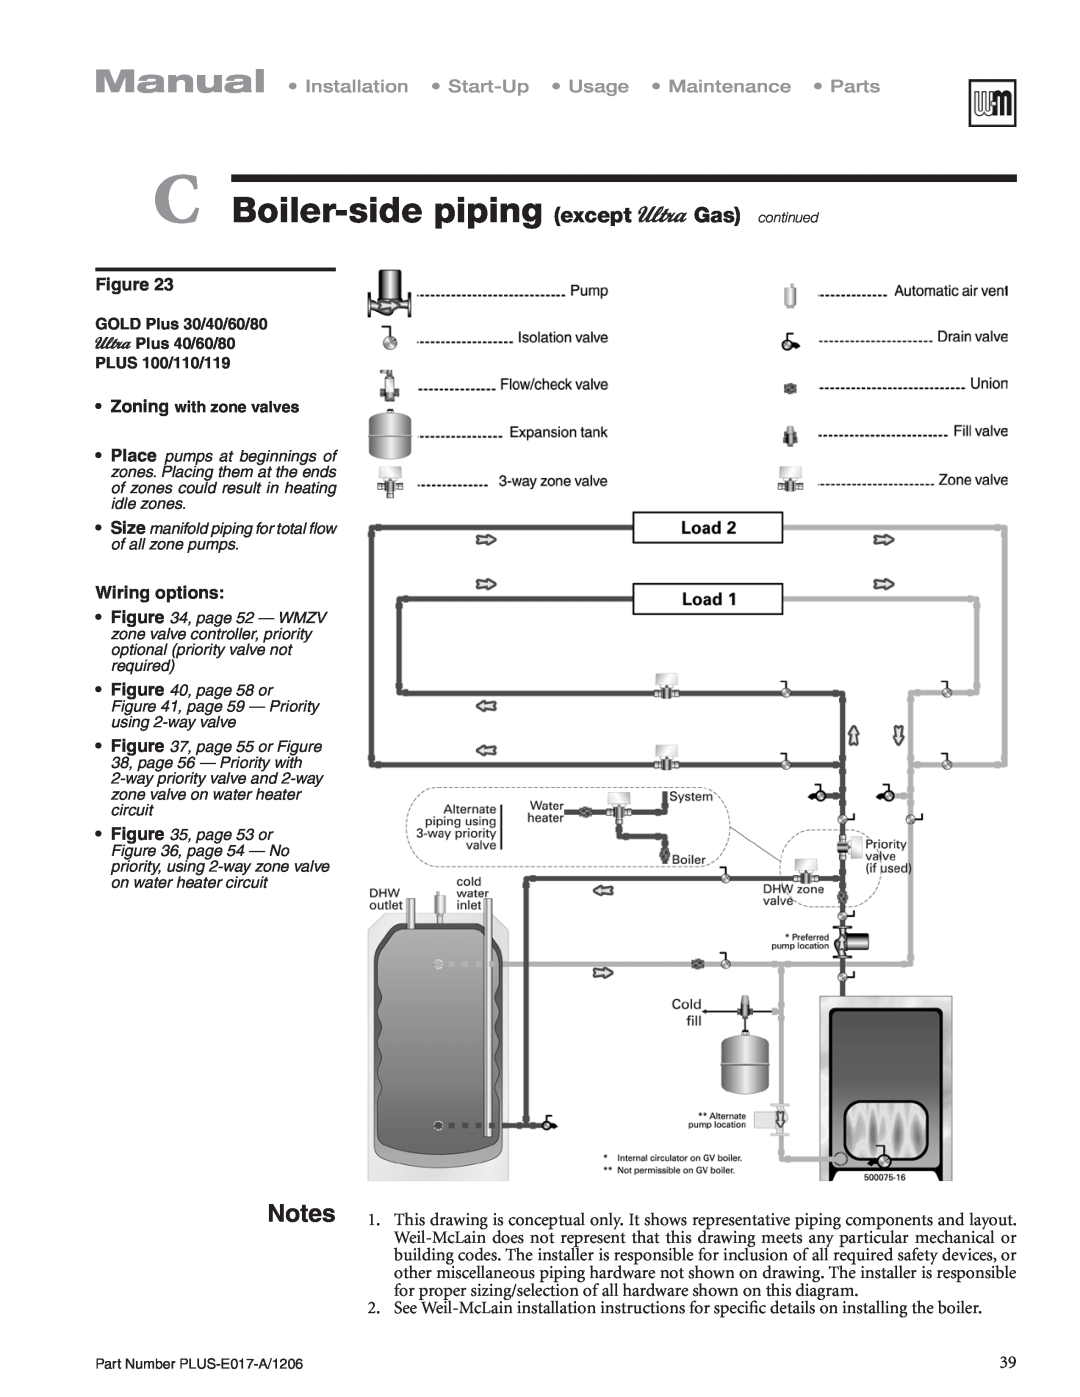 Weil-McLain PLUS-E017-A/1206 manual C Boiler-sidepiping except Gas continued, Wiring options 